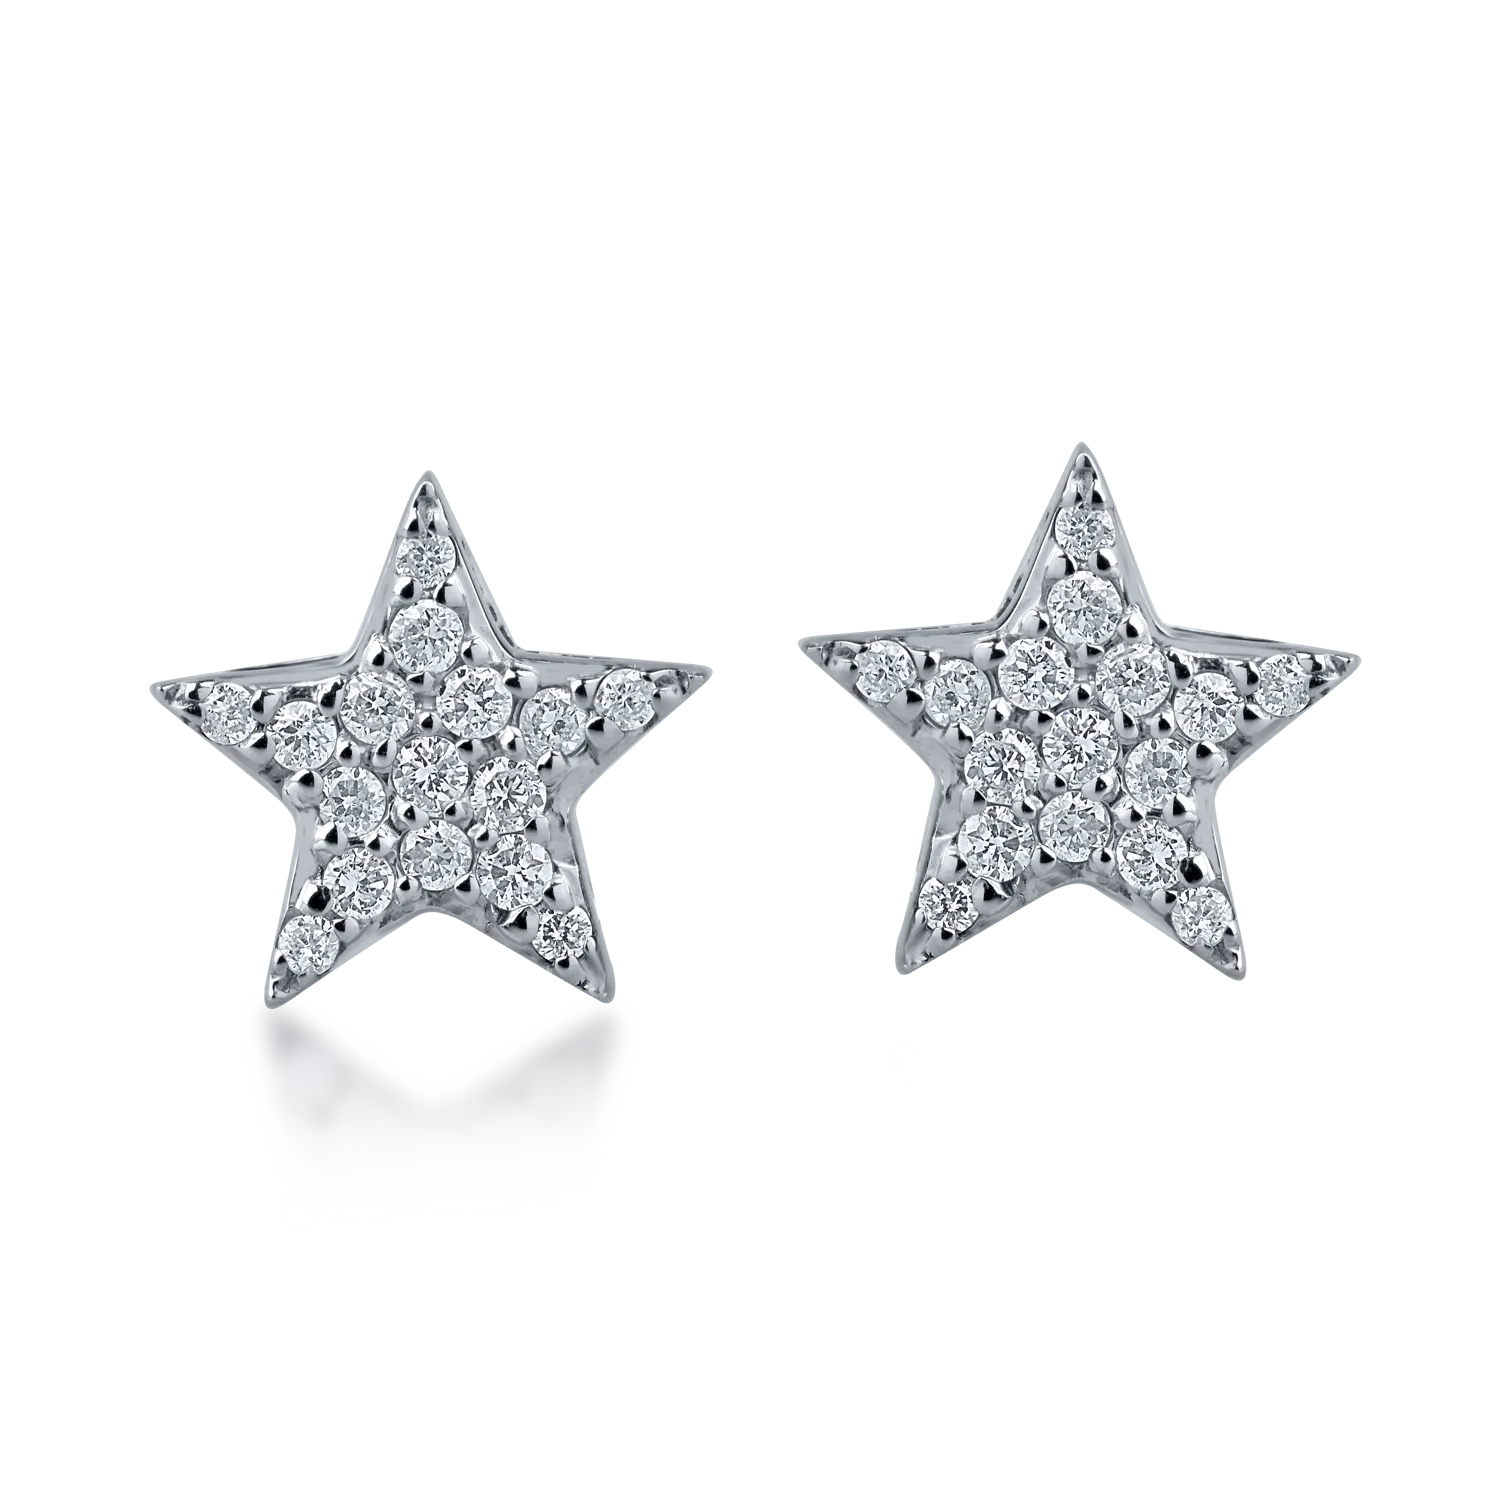 White gold star earrings with 0.15ct diamonds